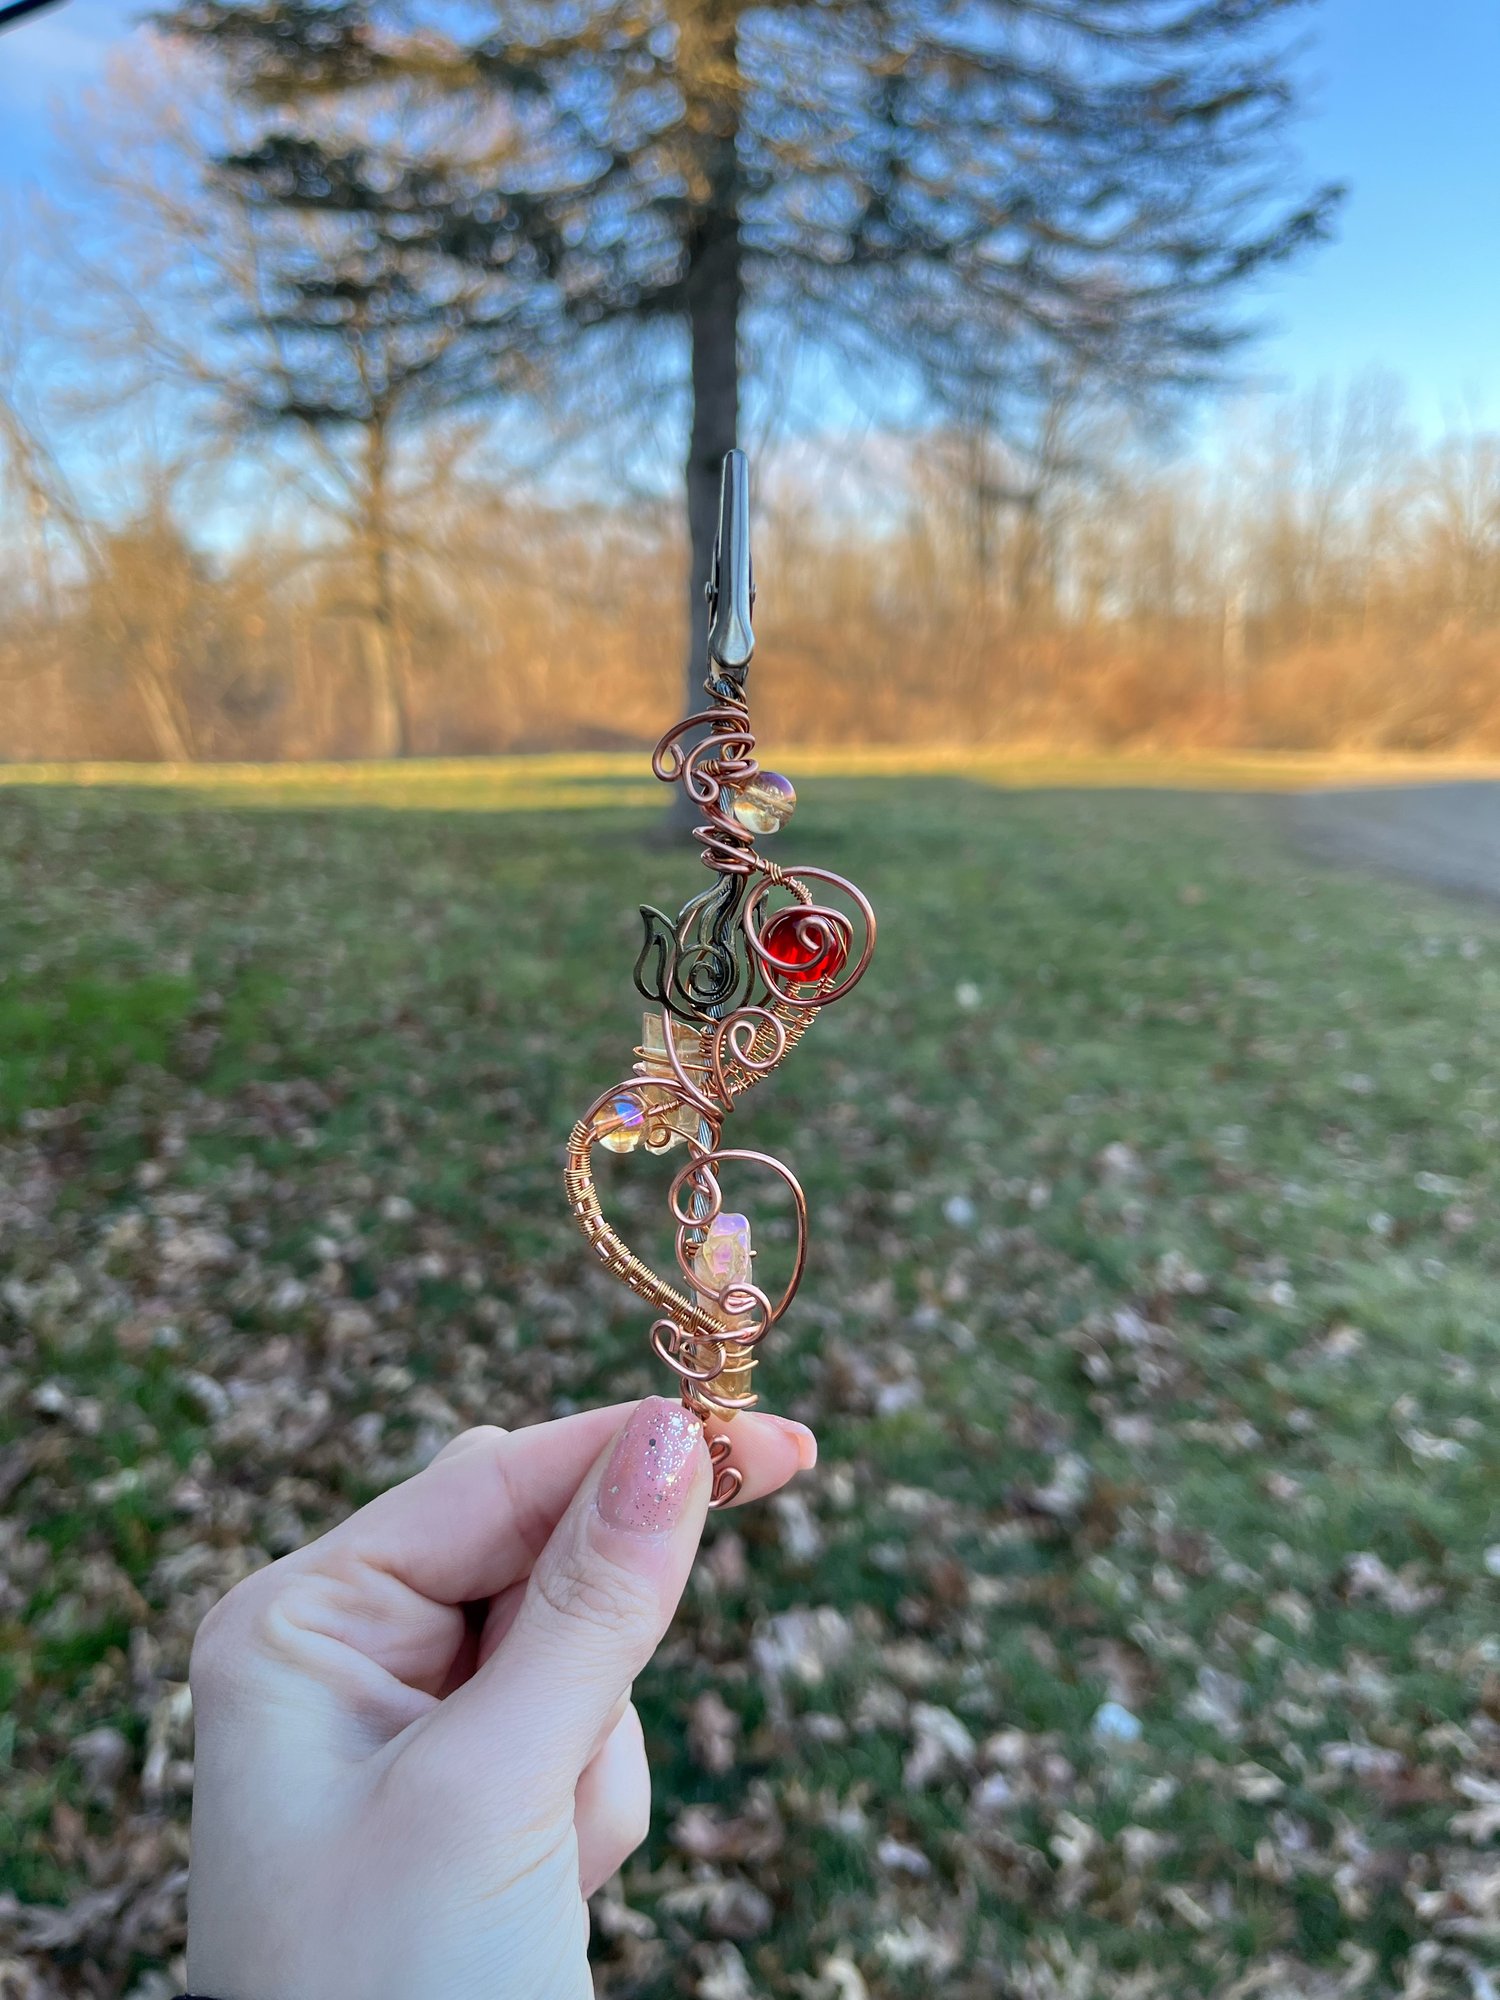 Curse of the fire nation roach clip 